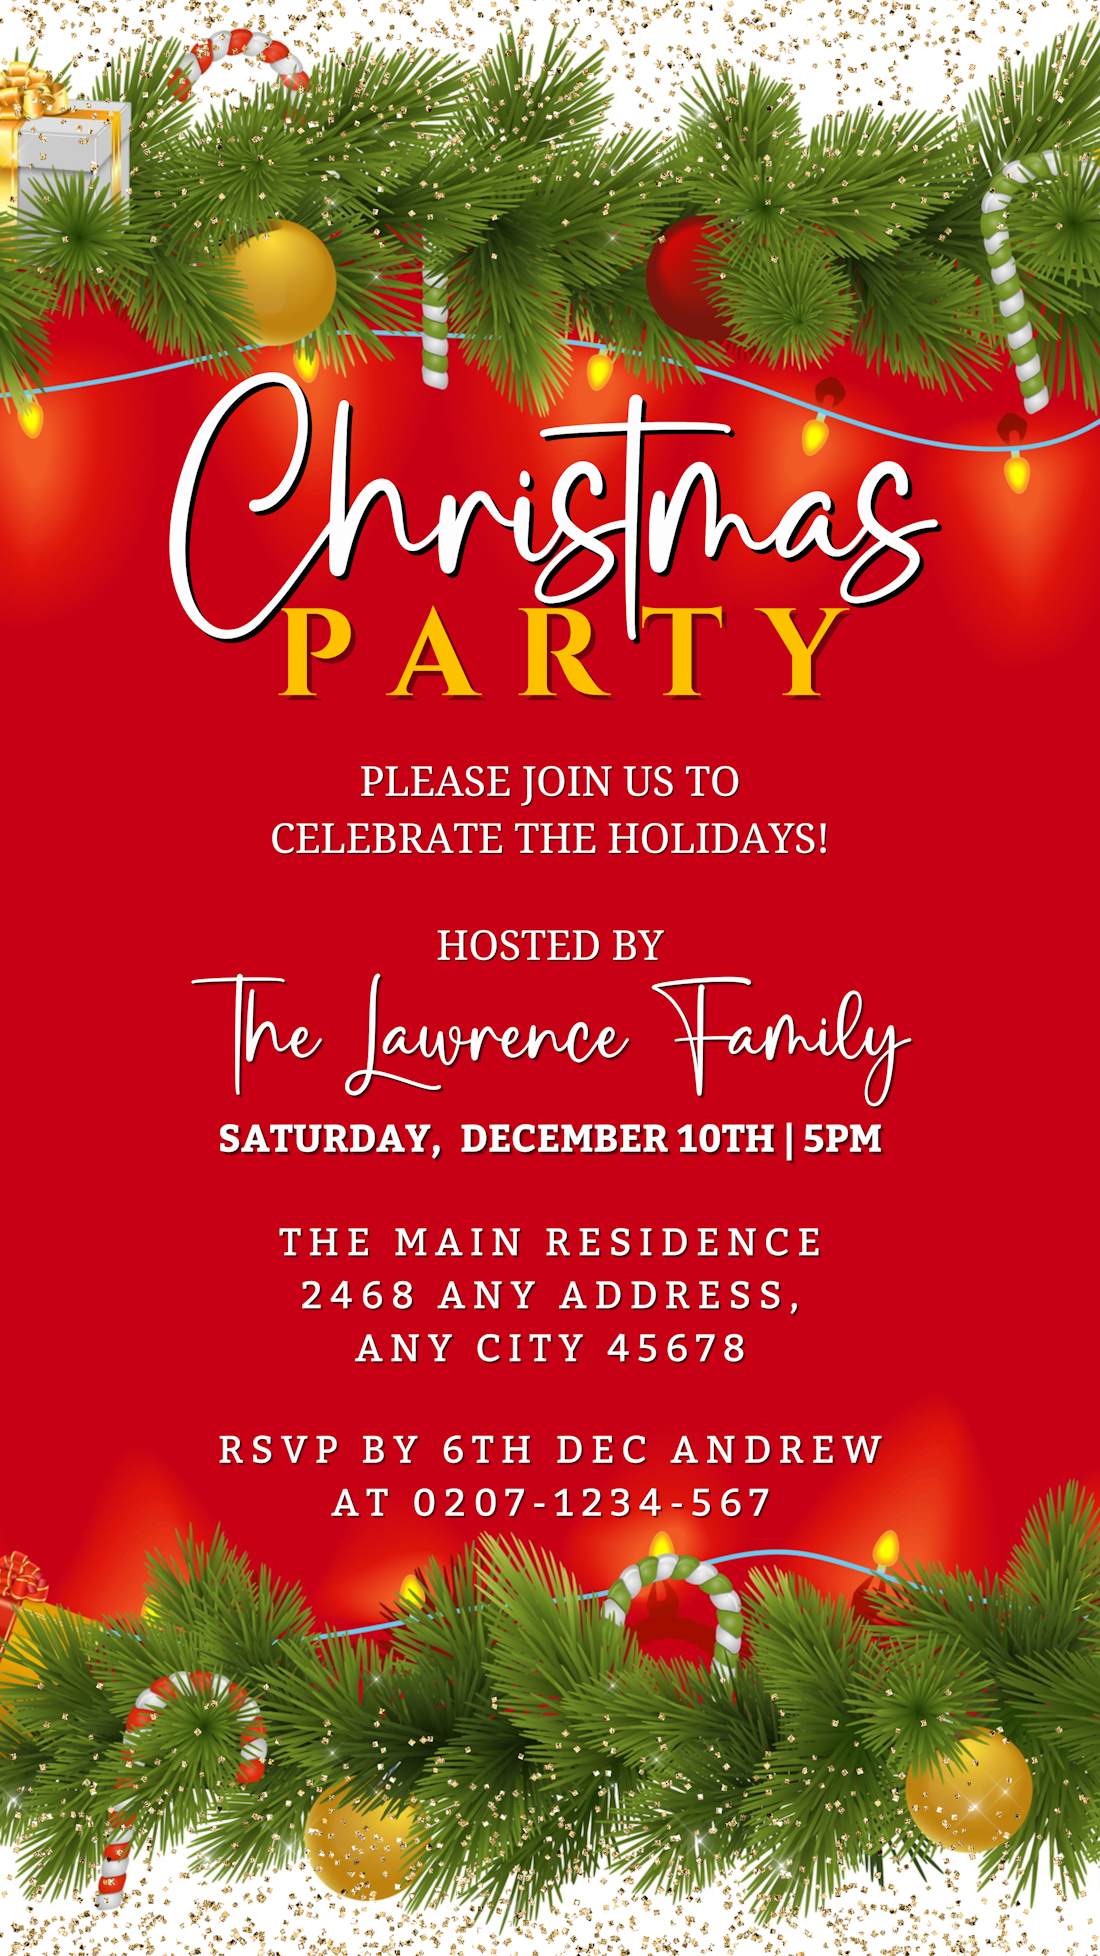 Editable Christmas Party Evite featuring red, green, and white ornaments, pine branches, and lights. Customizable digital template for invitations via Canva.